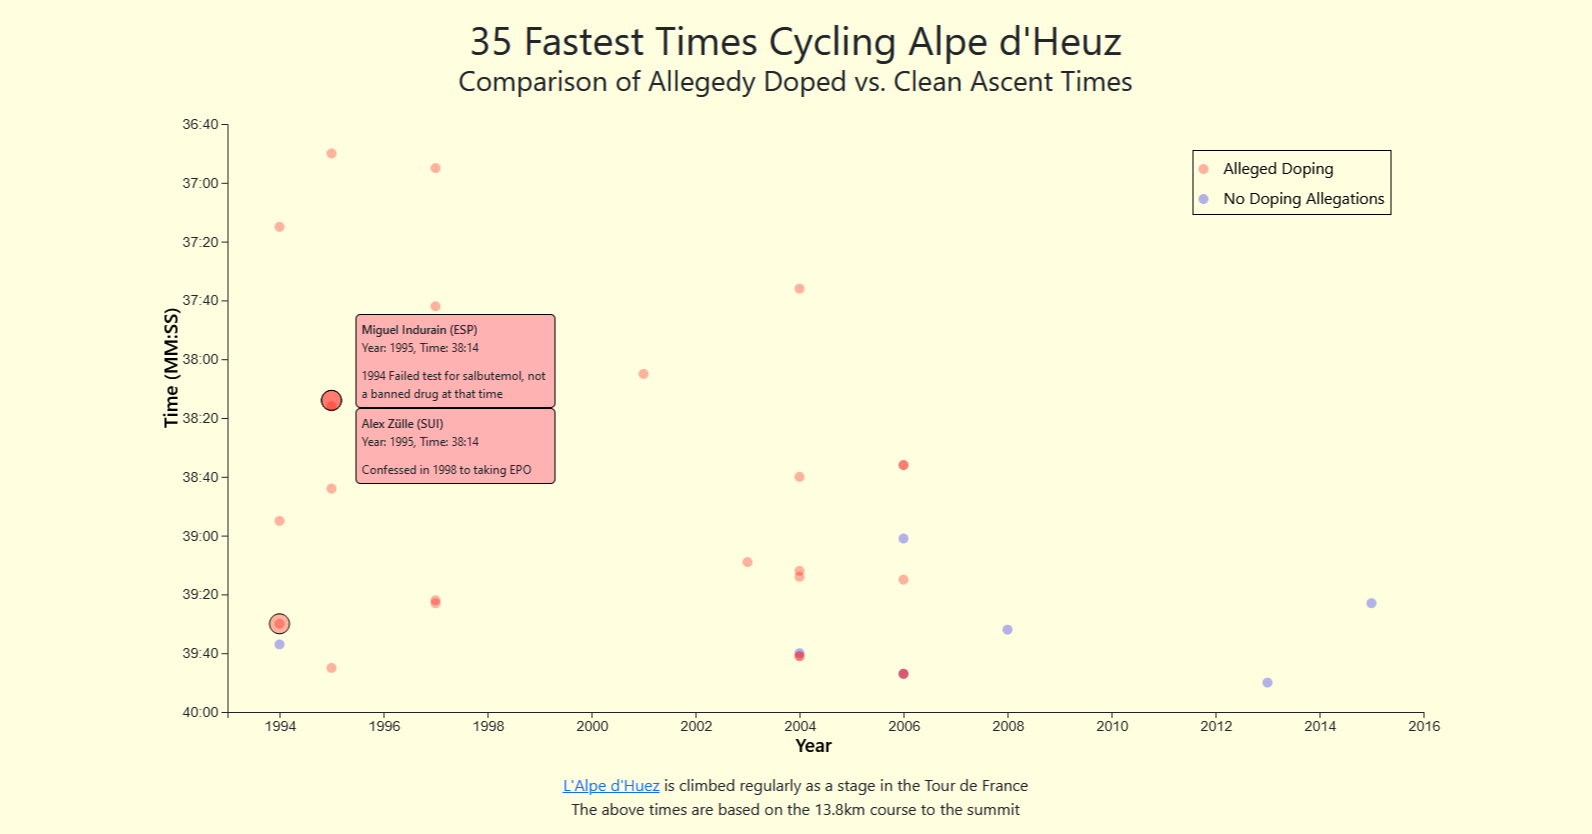 Data Visualisation Project 2 - Cycling Race Times